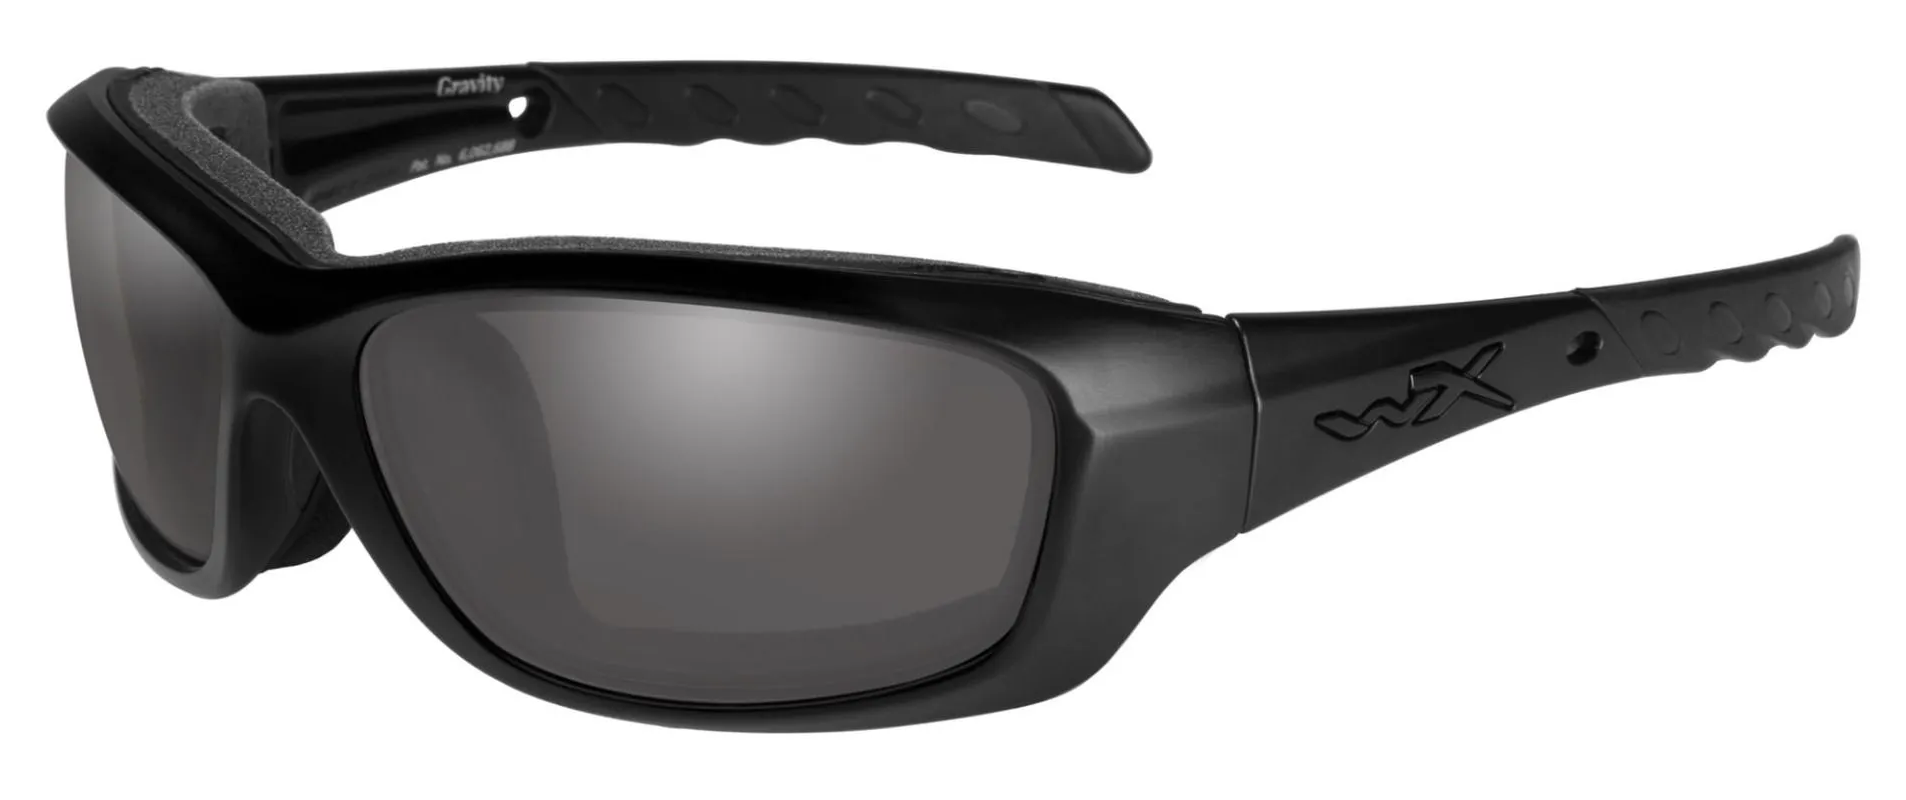 Wiley X Gravity sunglasses in black ops matte black with grey lenses